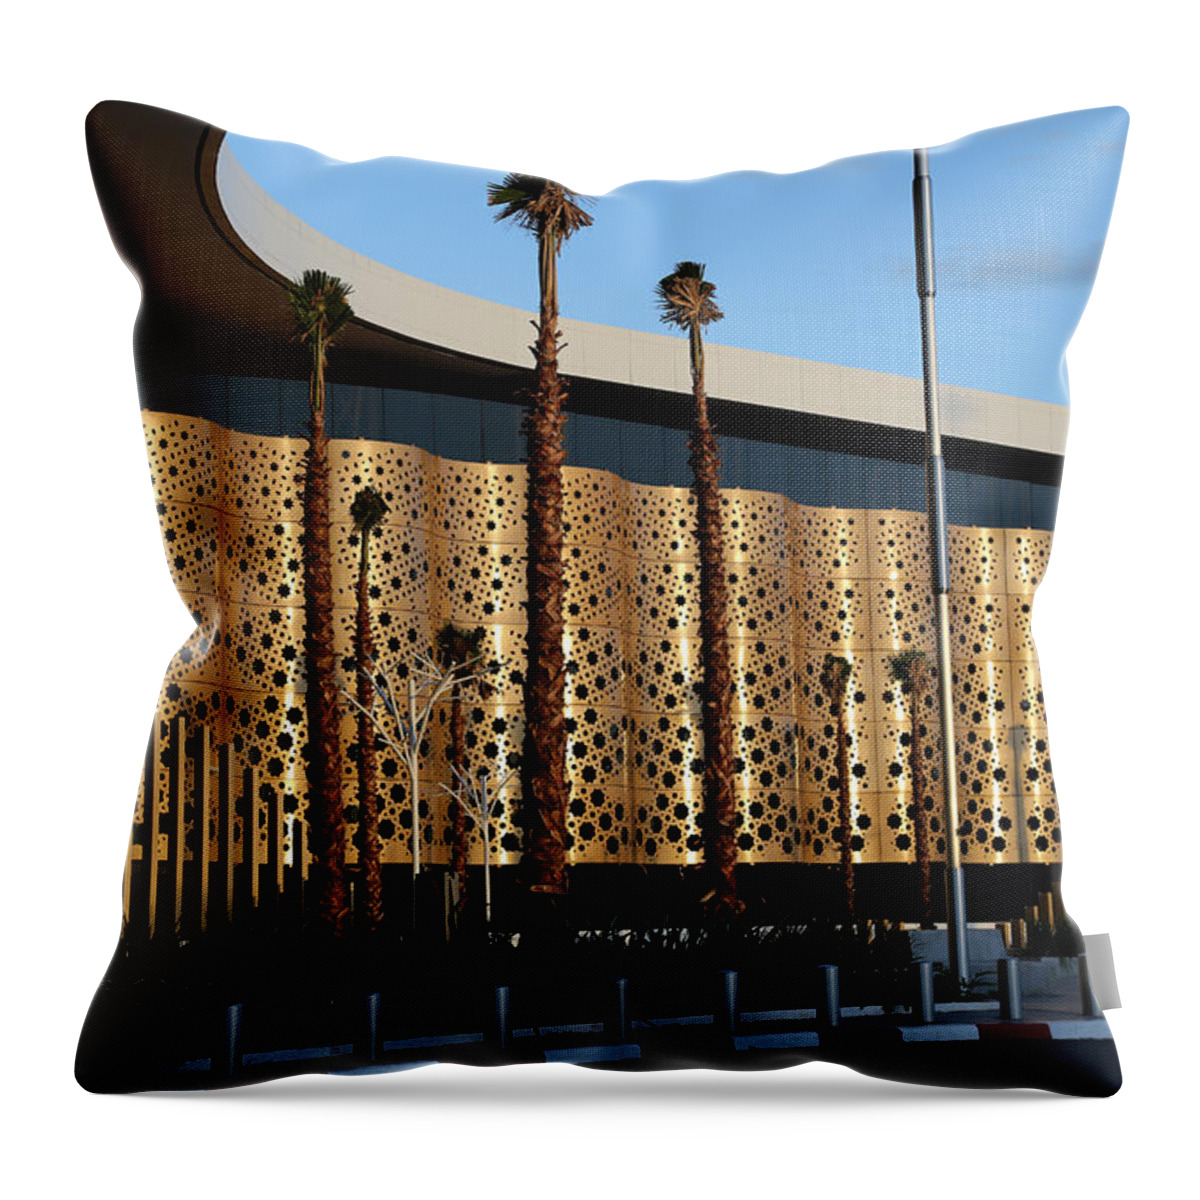 Marrakech Throw Pillow featuring the photograph Marrakech Airport 1 by Andrew Fare